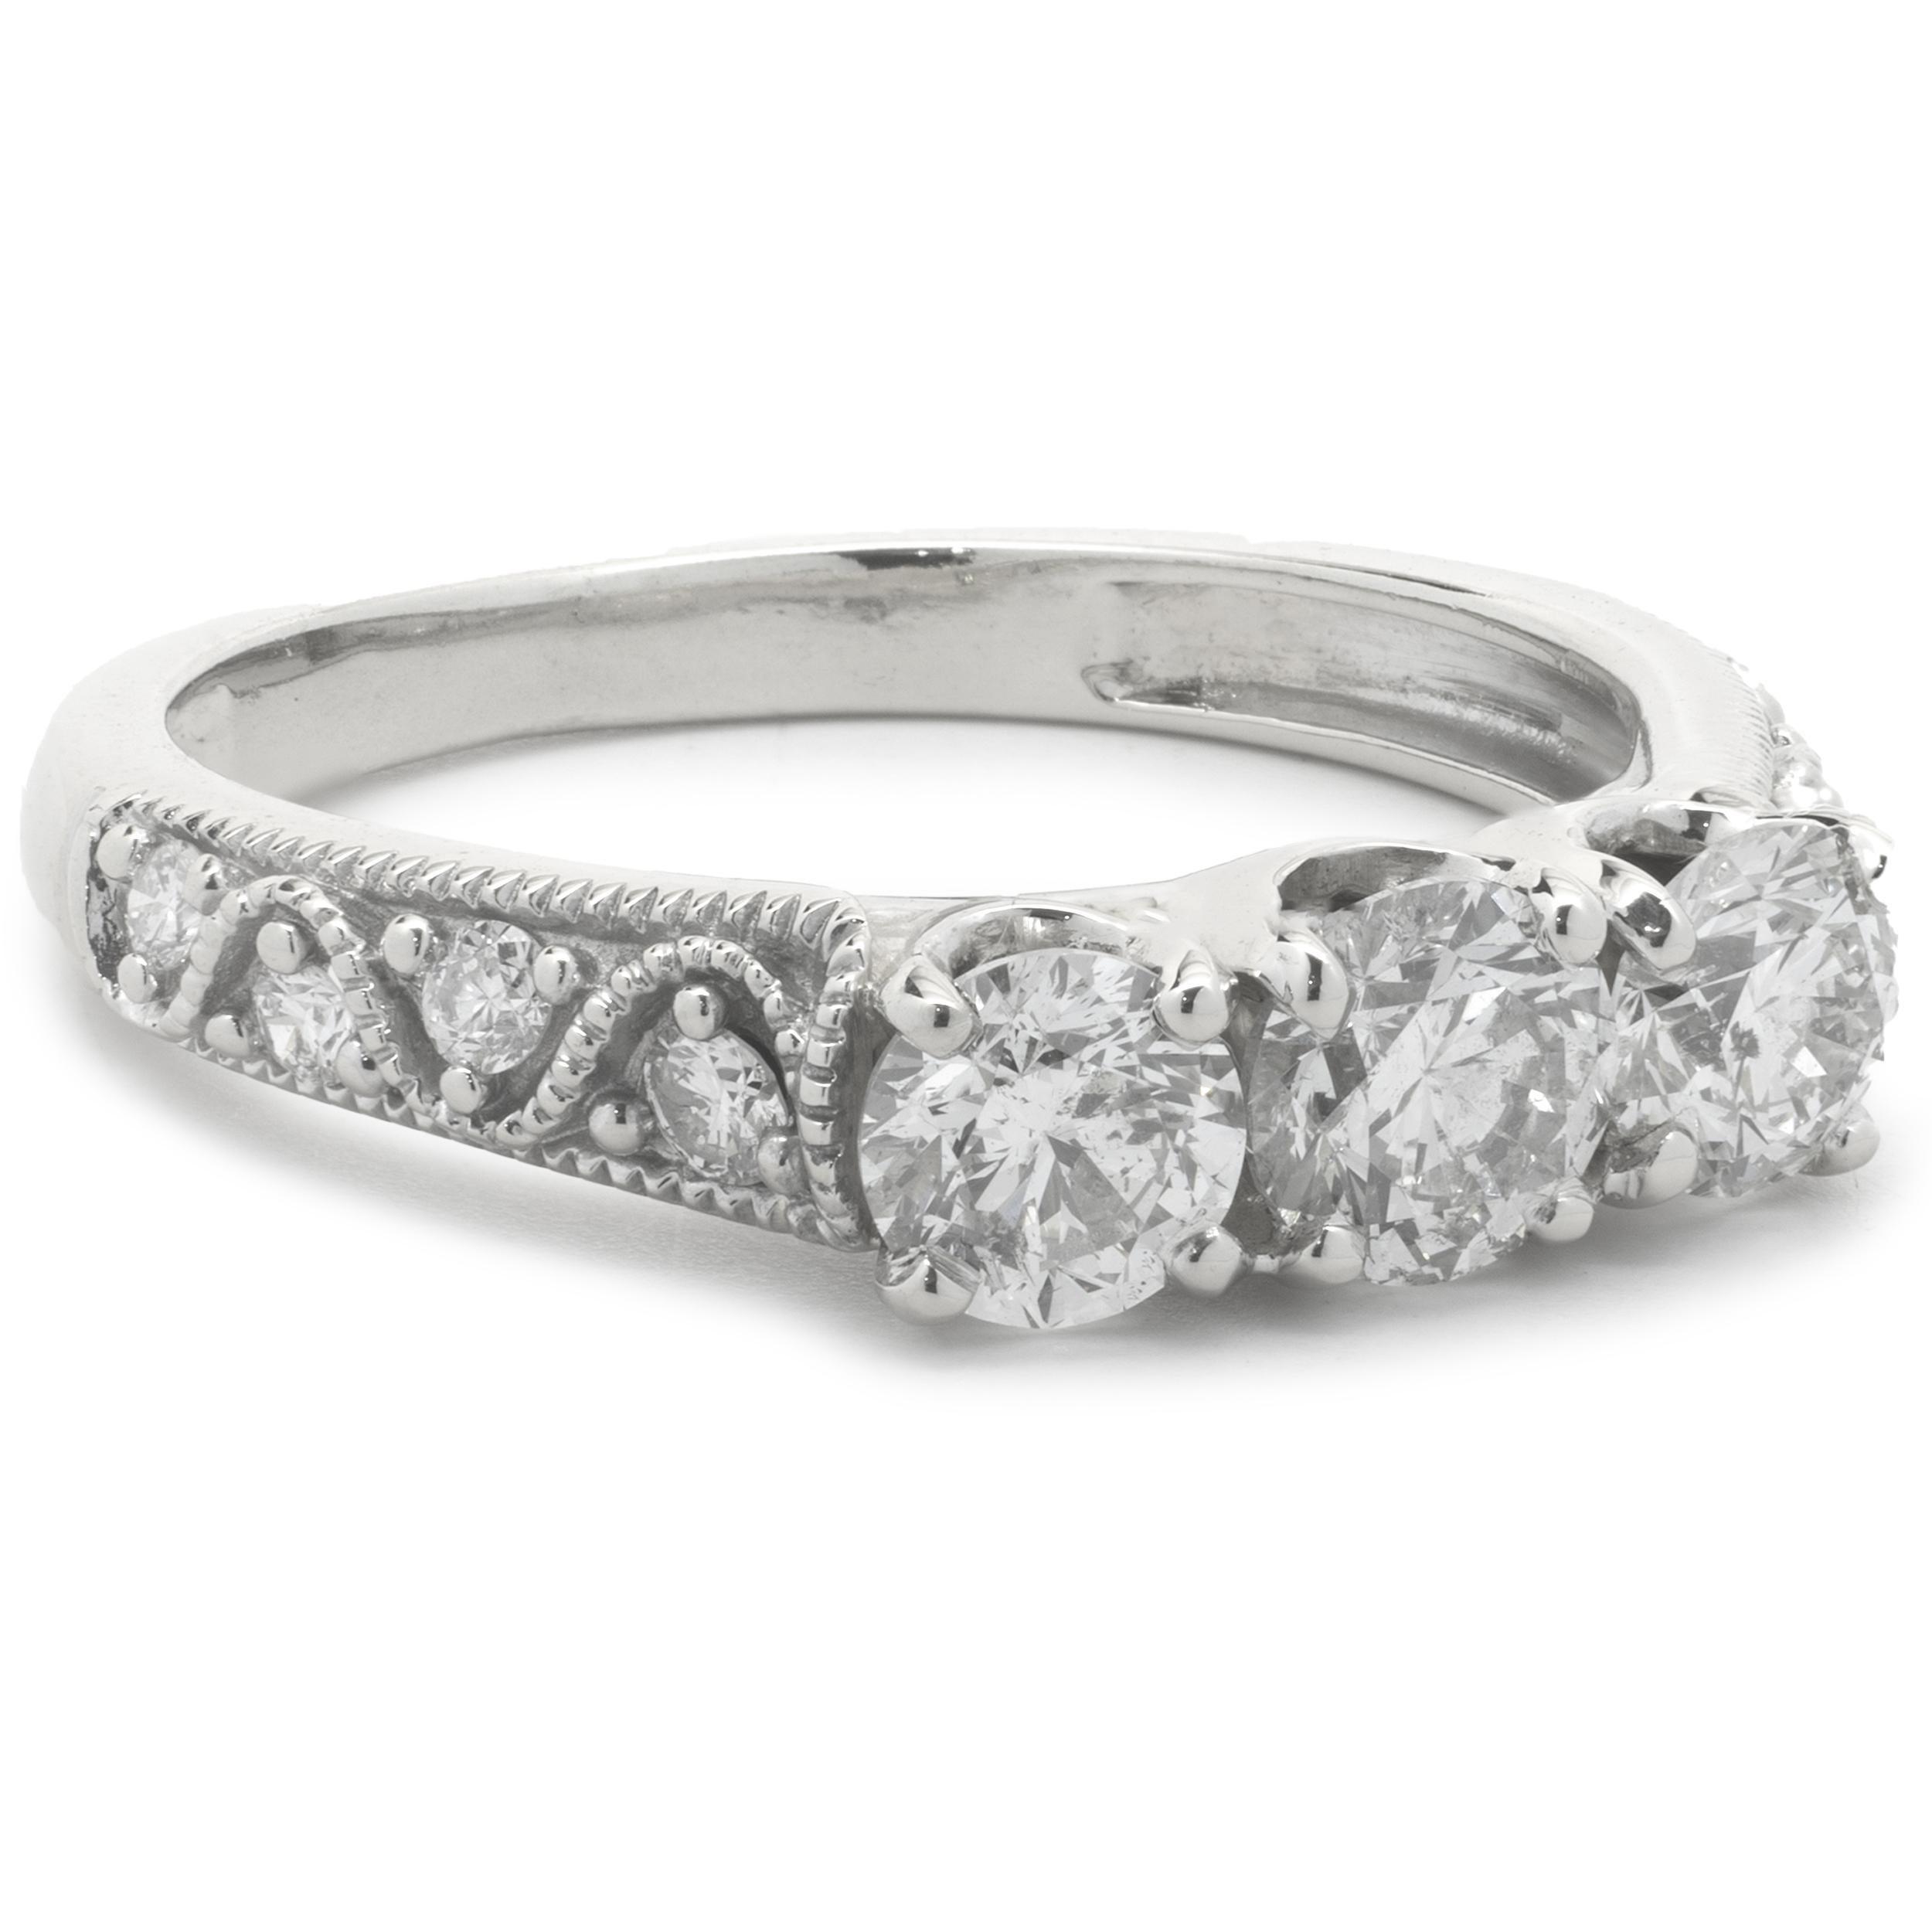 Designer: Custom
Material: 14K white gold
Diamonds: 11 round brilliant cut = 1.07cttw
Color: G
Clarity: SI1-2
Size: 6.5 complimentary sizing available 
Dimensions: ring measures 4.50mm in width
Weight: 3.72 grams
